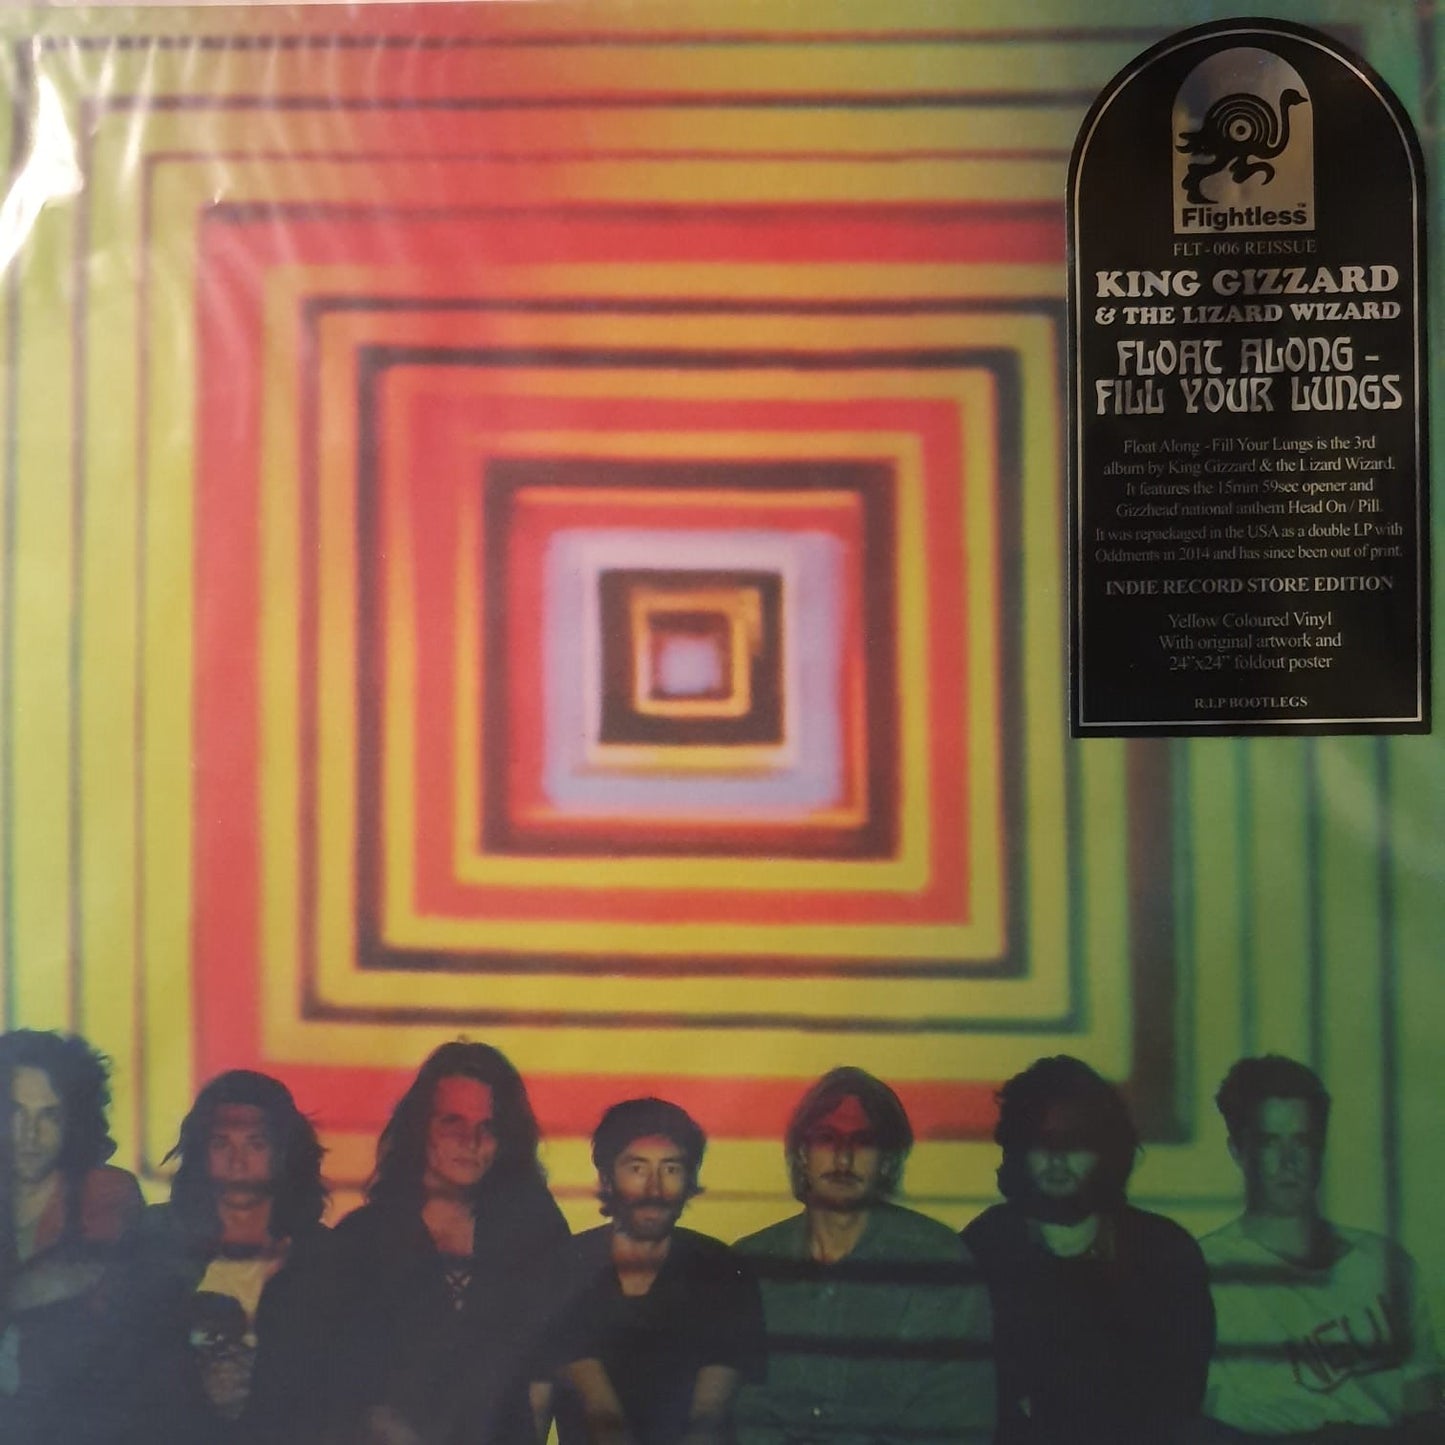 NEW - King Gizzard & The Lizard Wizard, Float Along - Fill Your Lungs Easter Yellow Vinyl